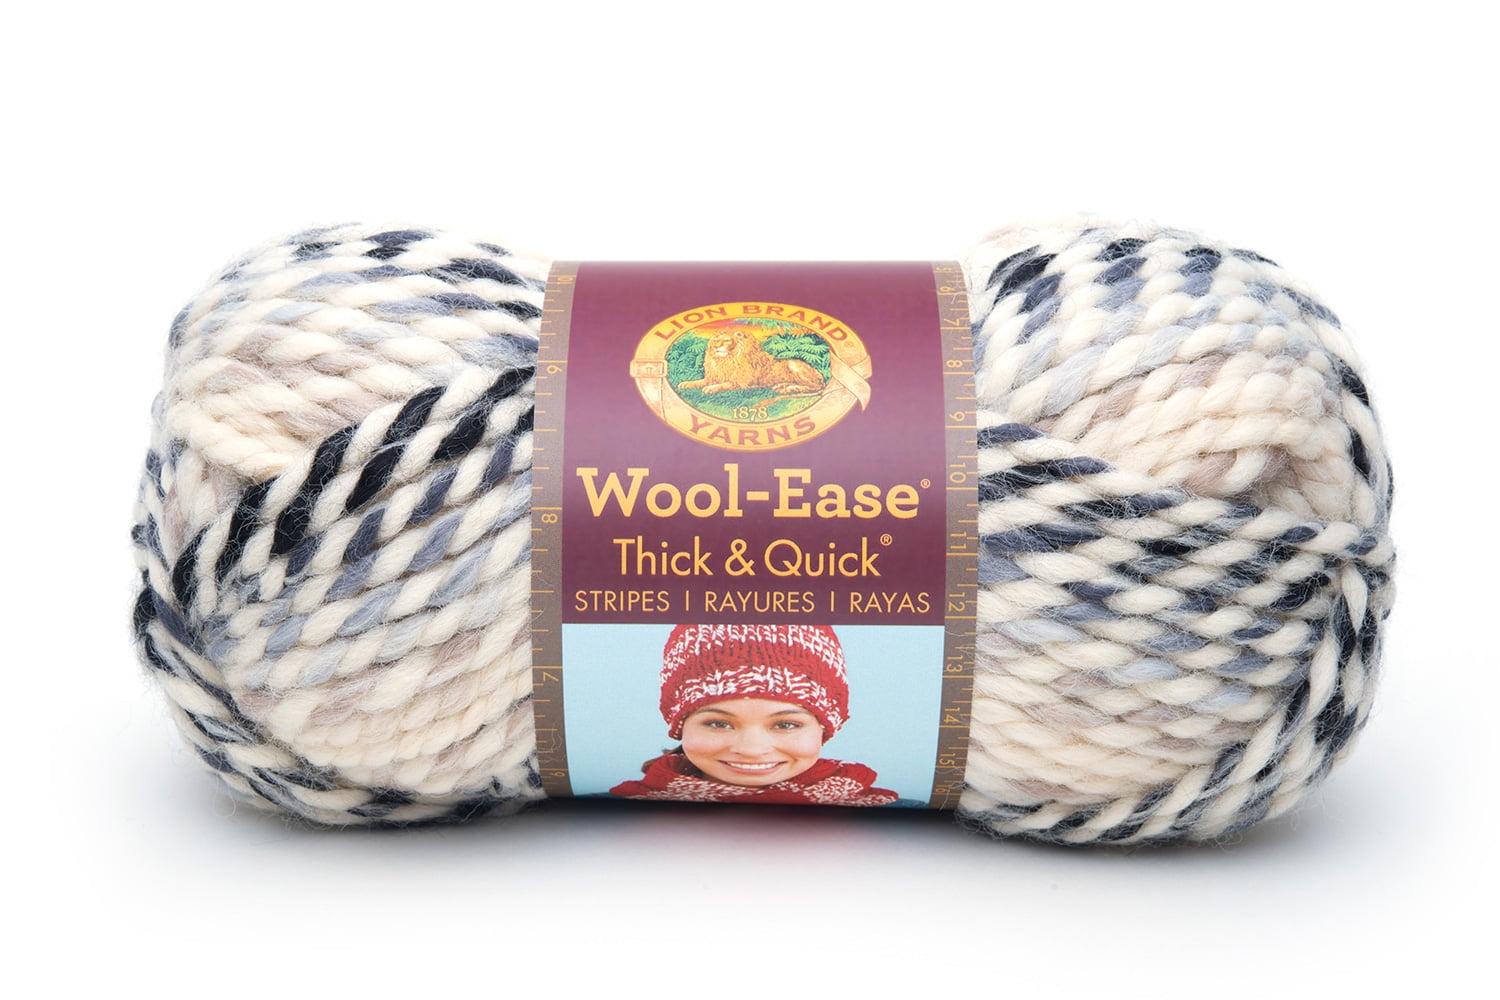 Lion Brand Wool Ease Thick & Quick Yarn - Moonlight